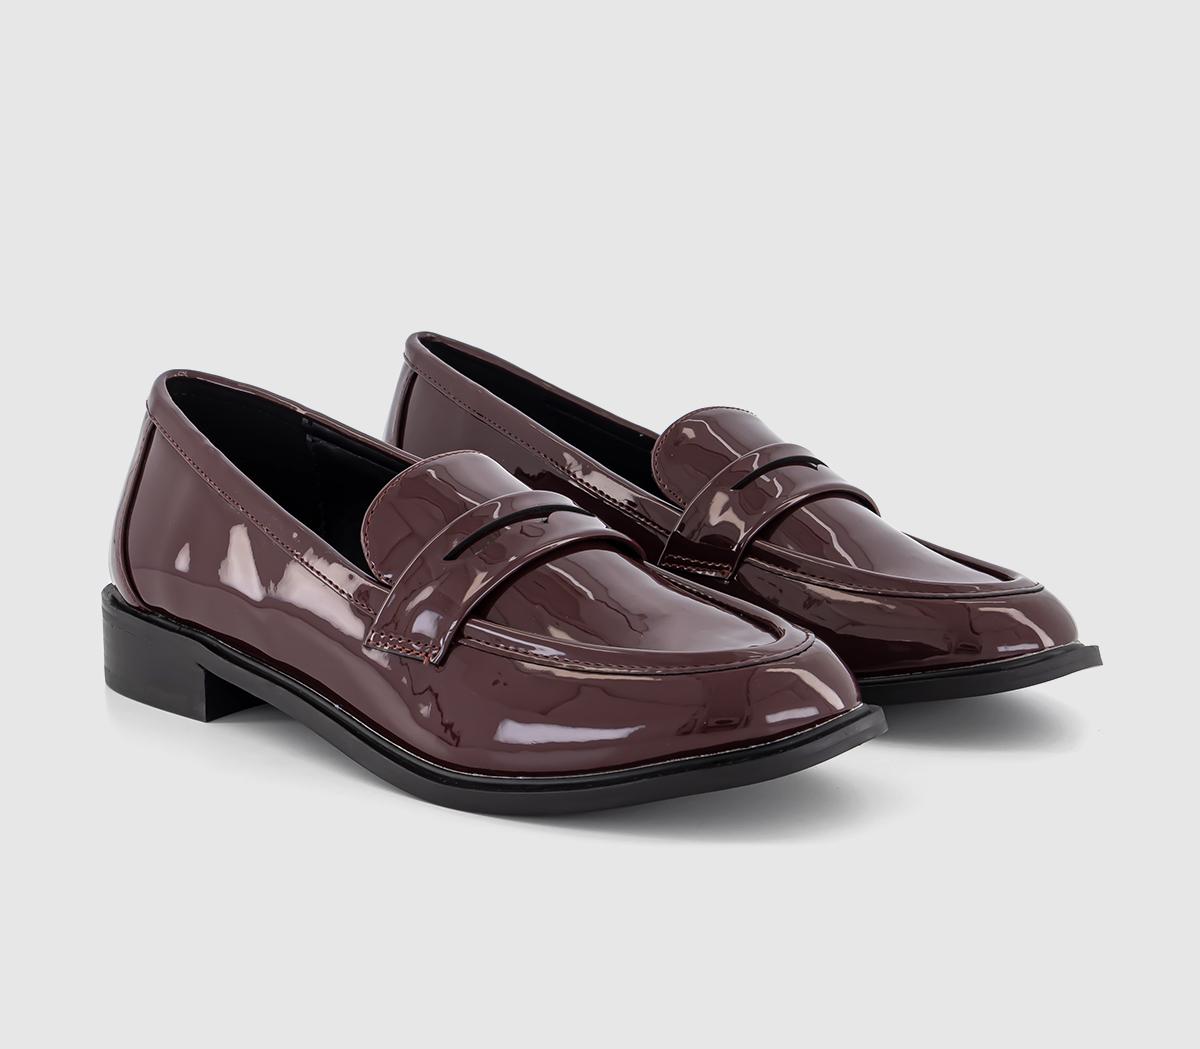 OFFICE Flaming Penny Loafers Burgundy Patent Purple, 4